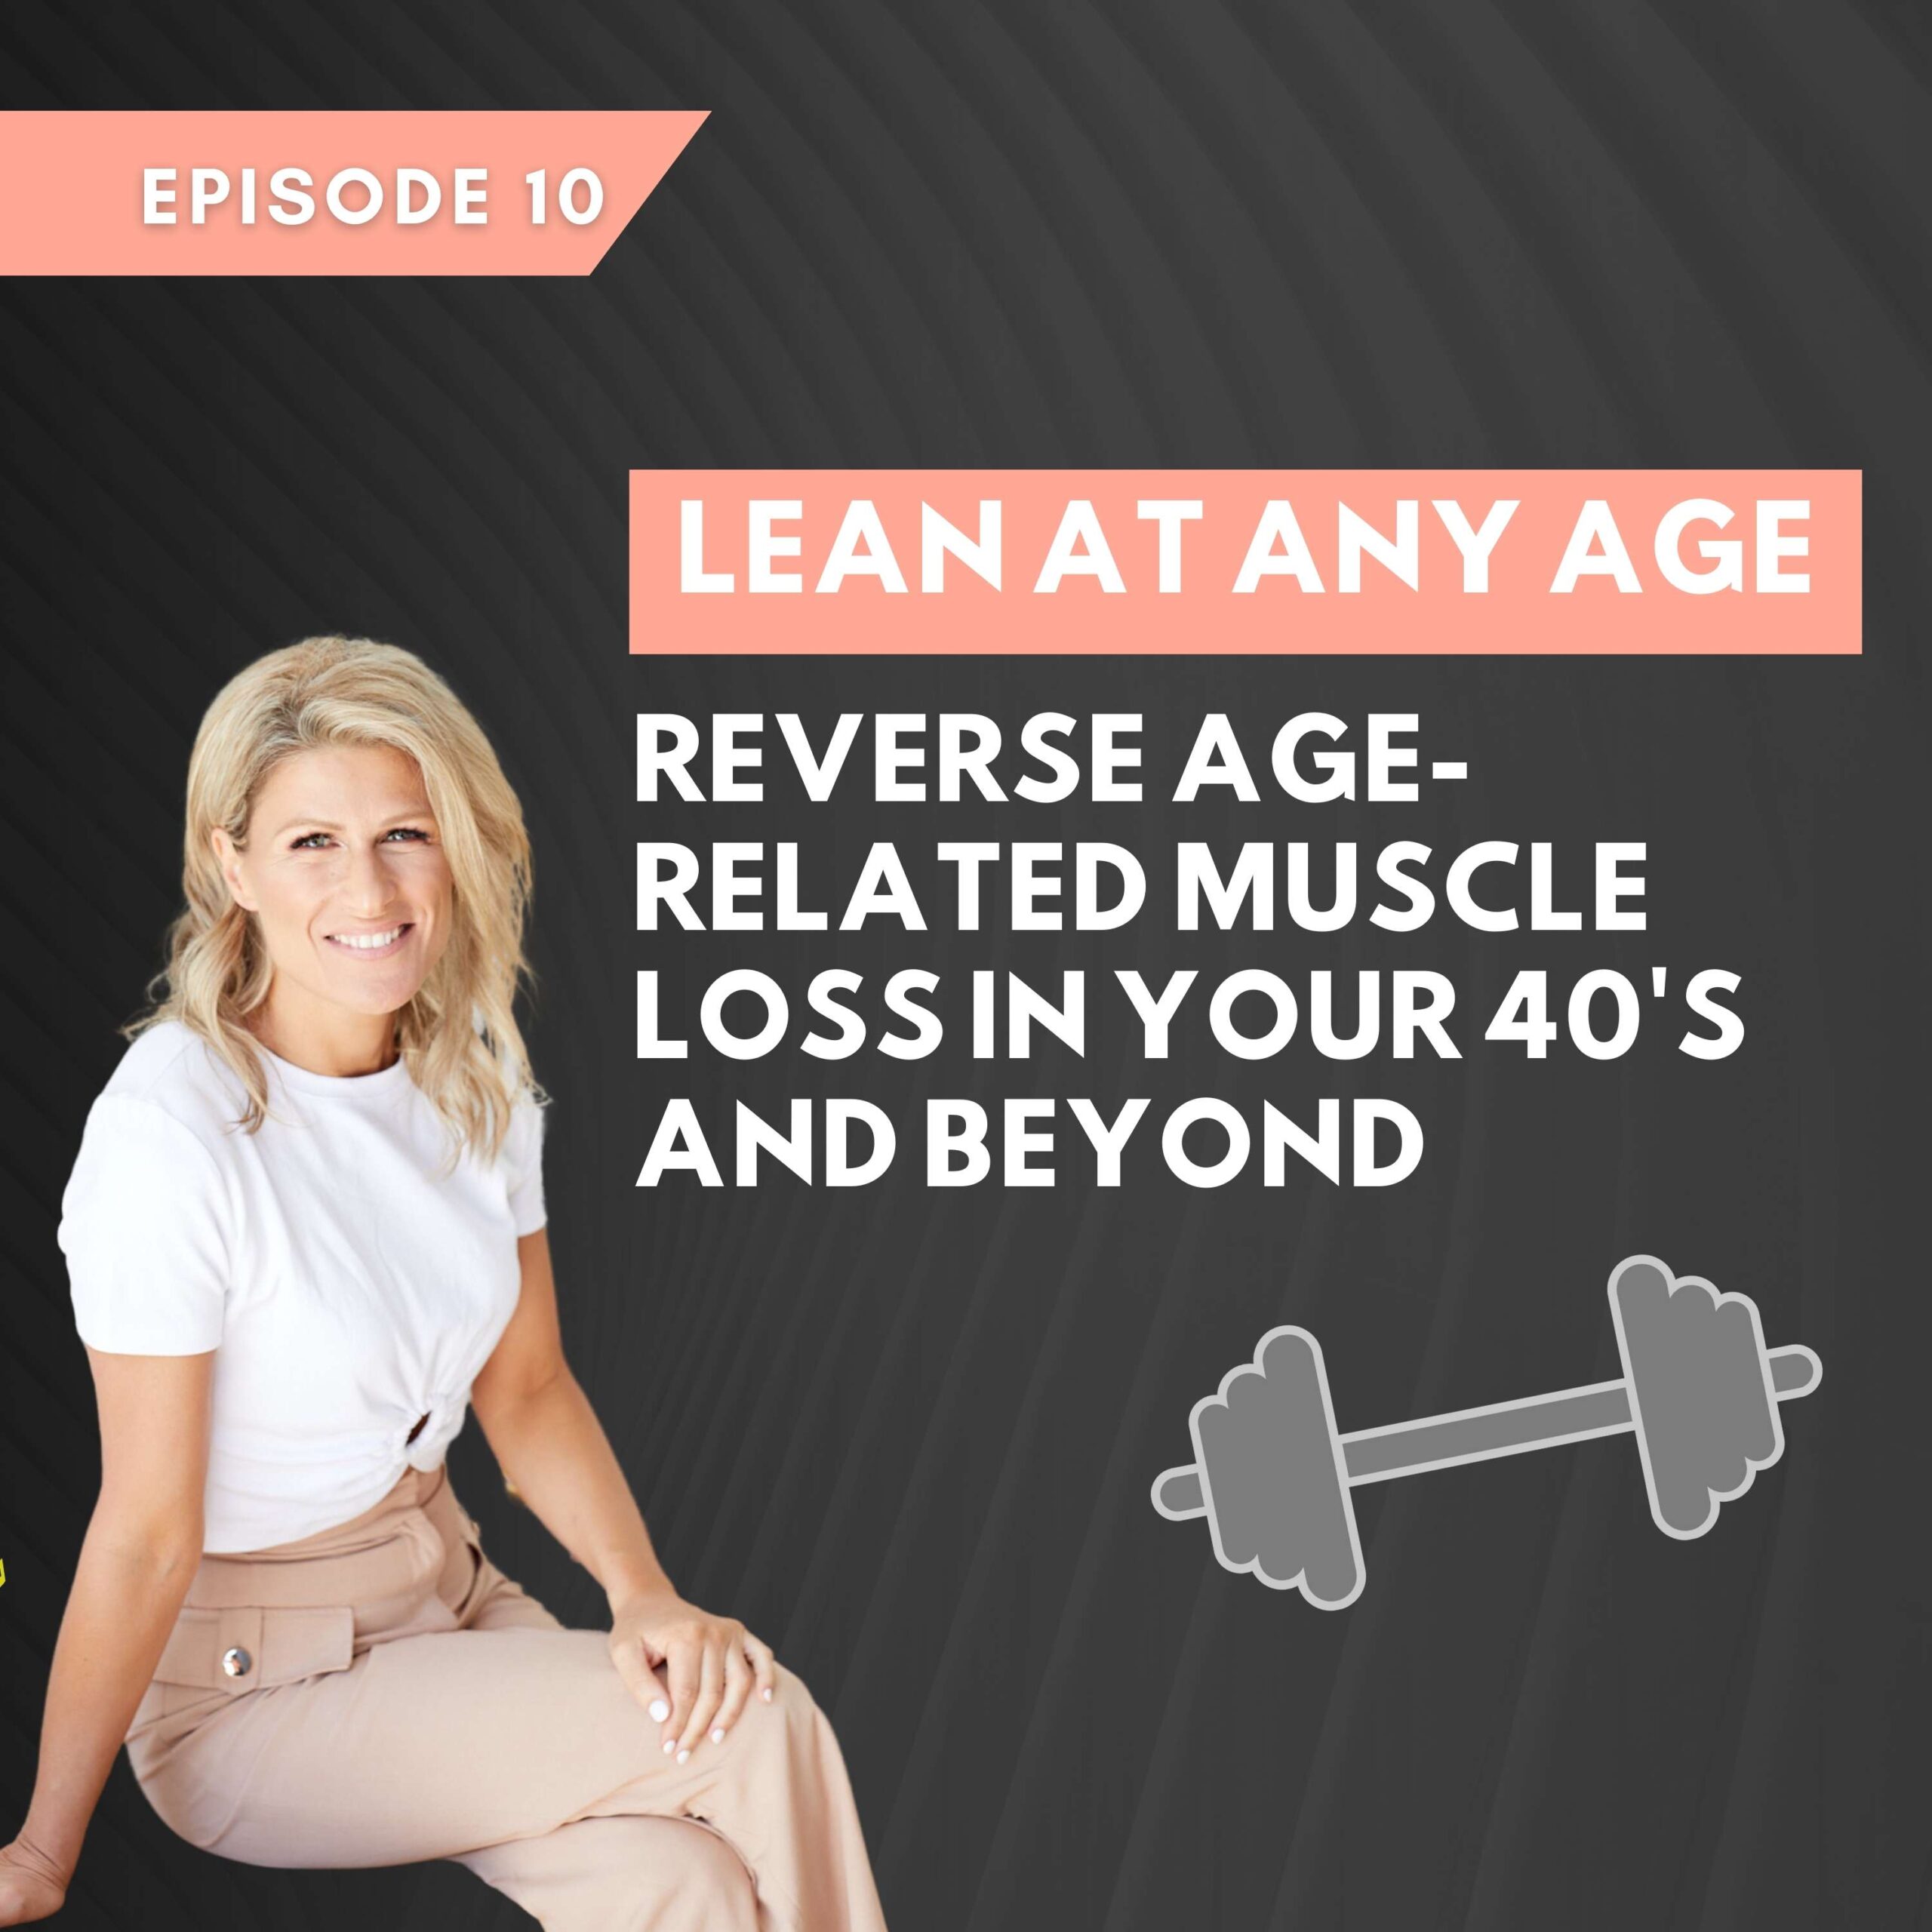 Reverse age-related muscle loss in our 40s and beyond